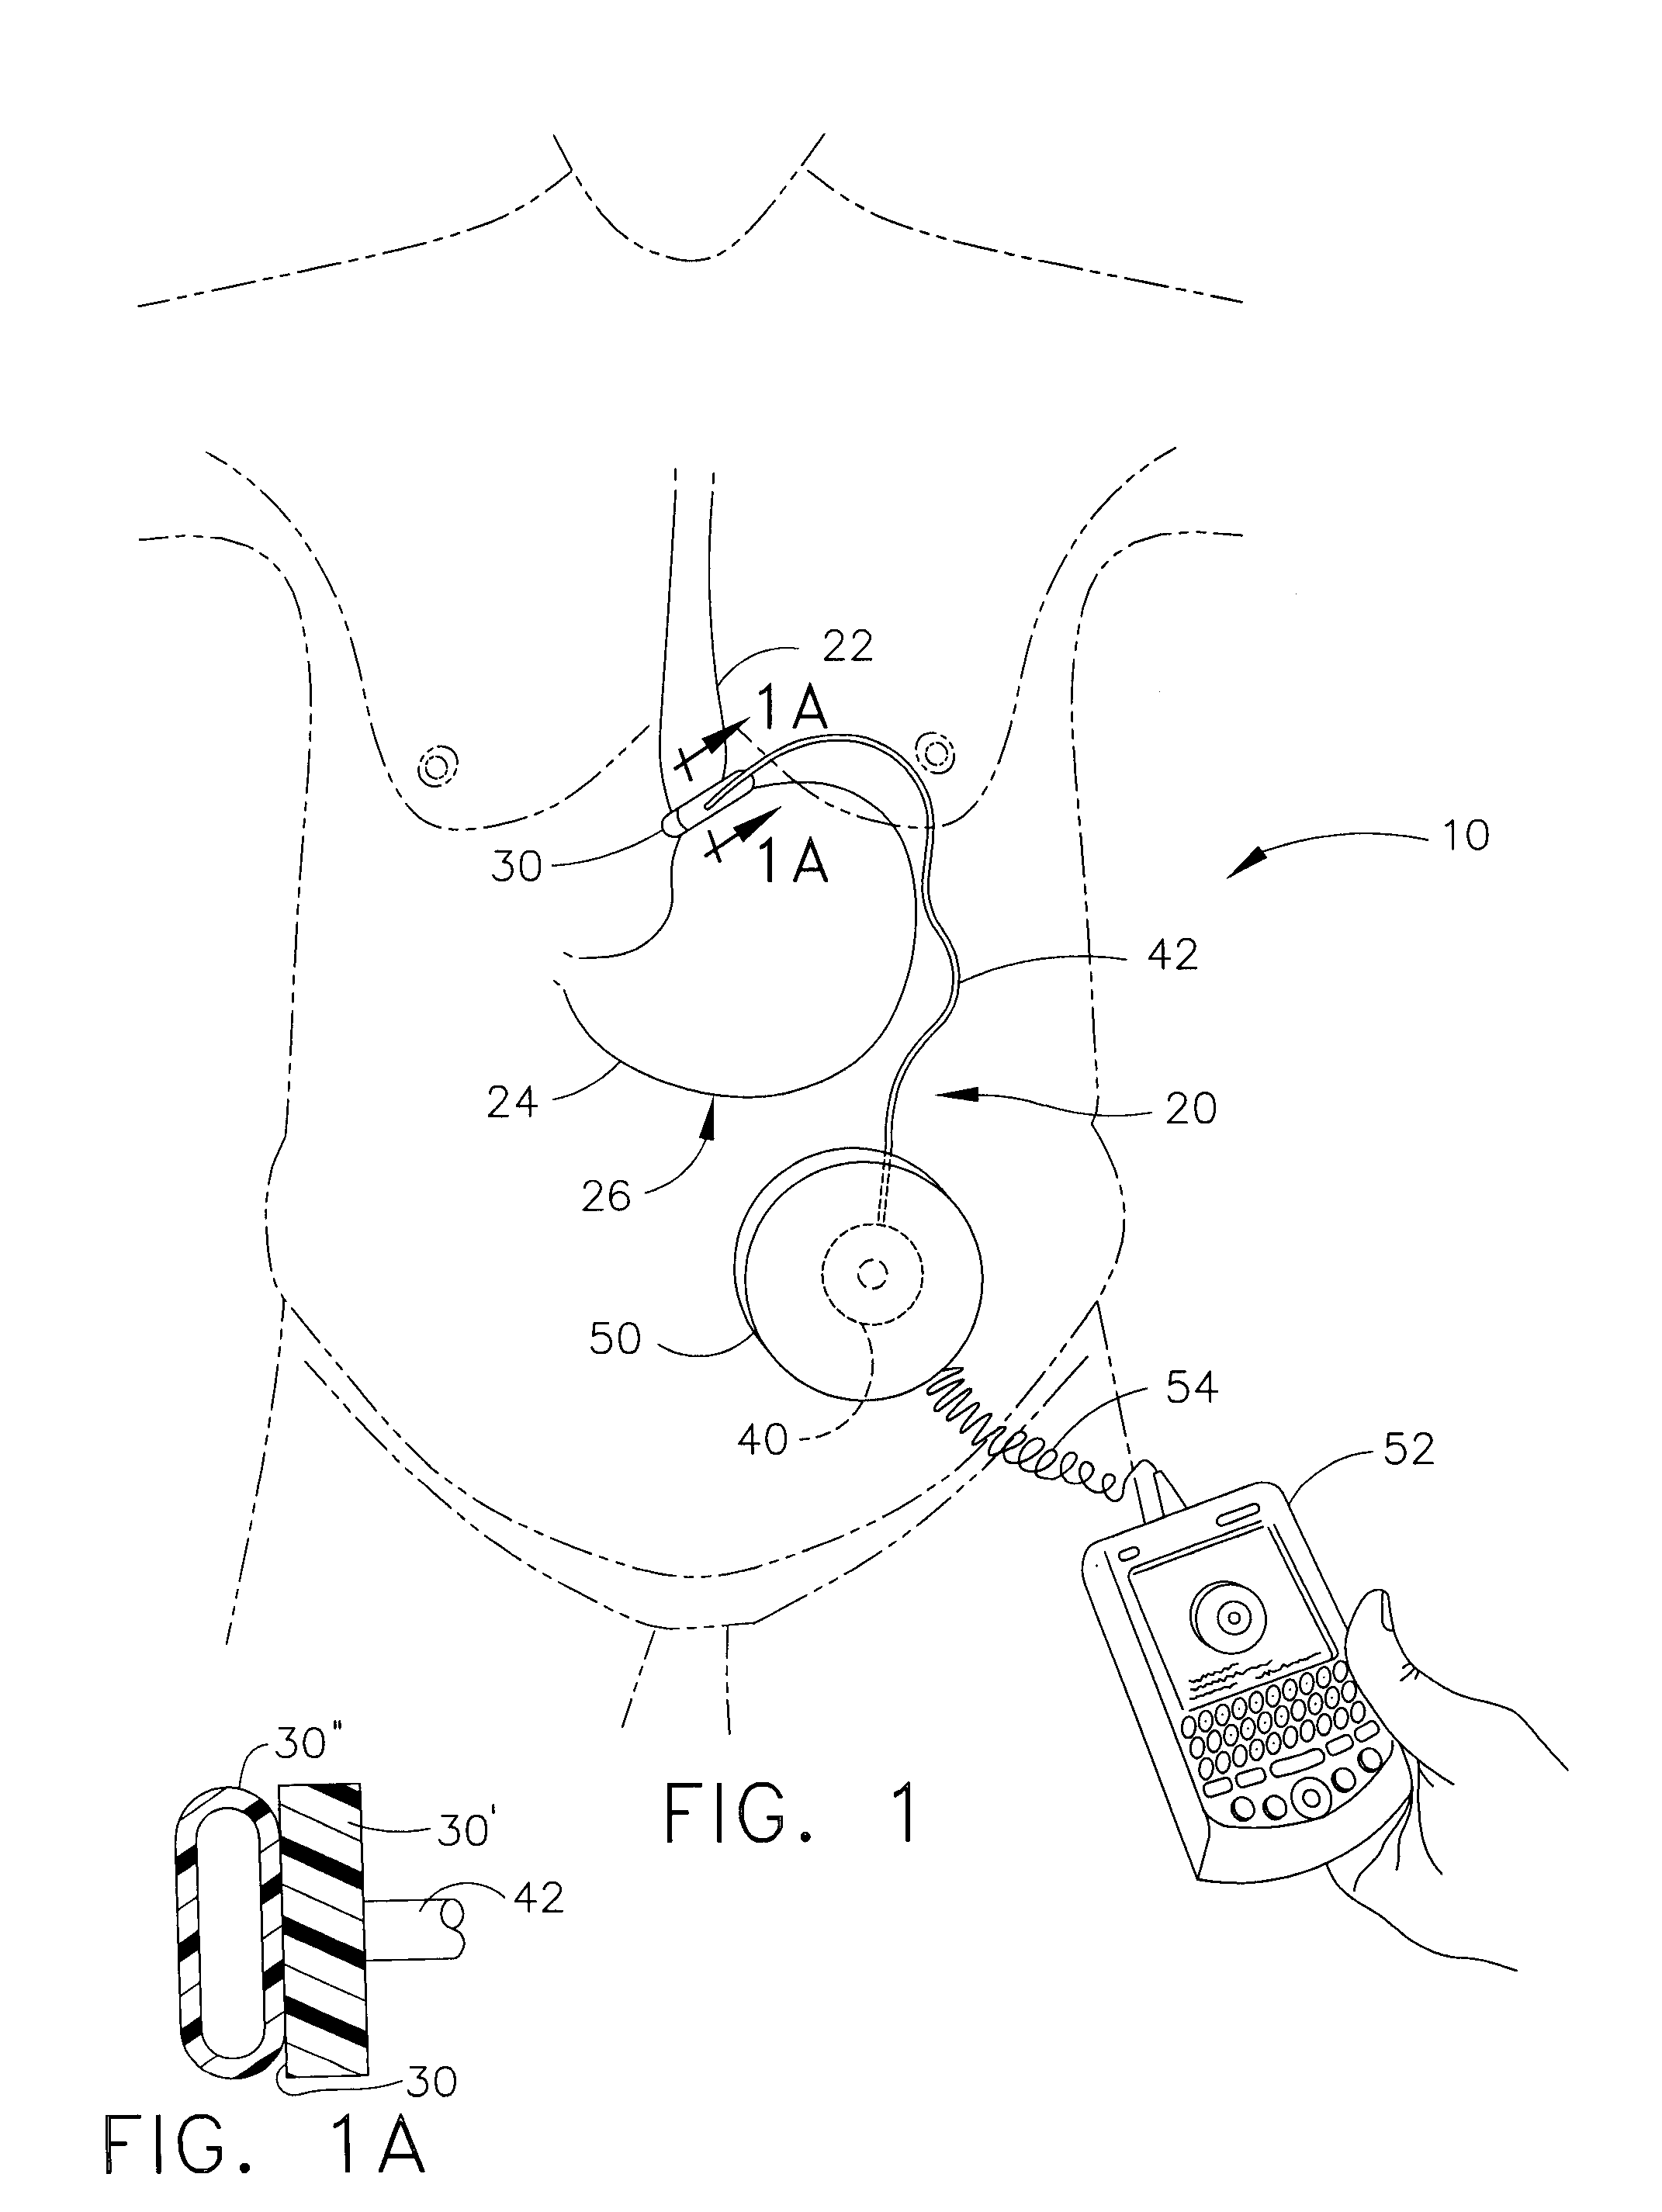 Bi-directional infuser pump with volume braking for hydraulically controlling an adjustable gastric band